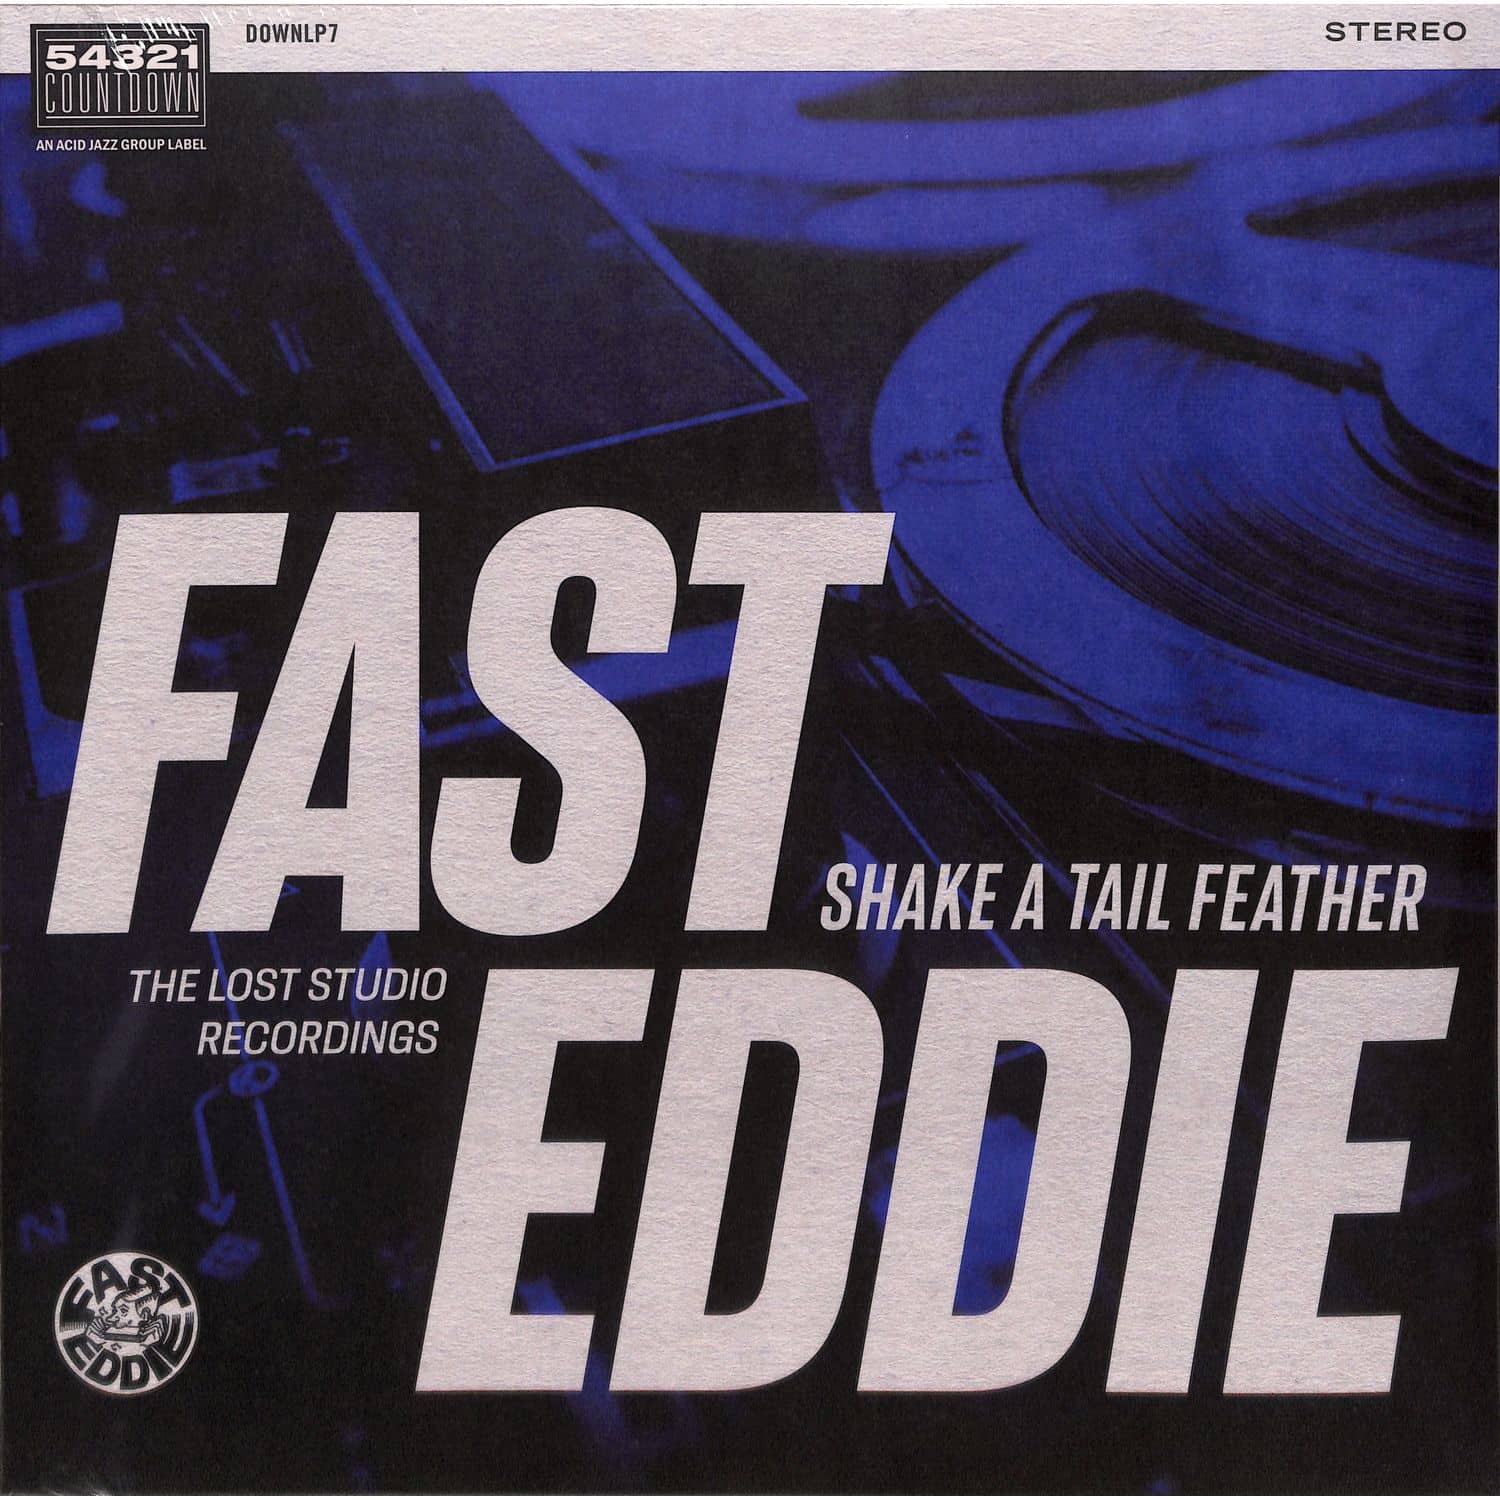 Fast Eddie - SHAKE A TAIL FEATHER 